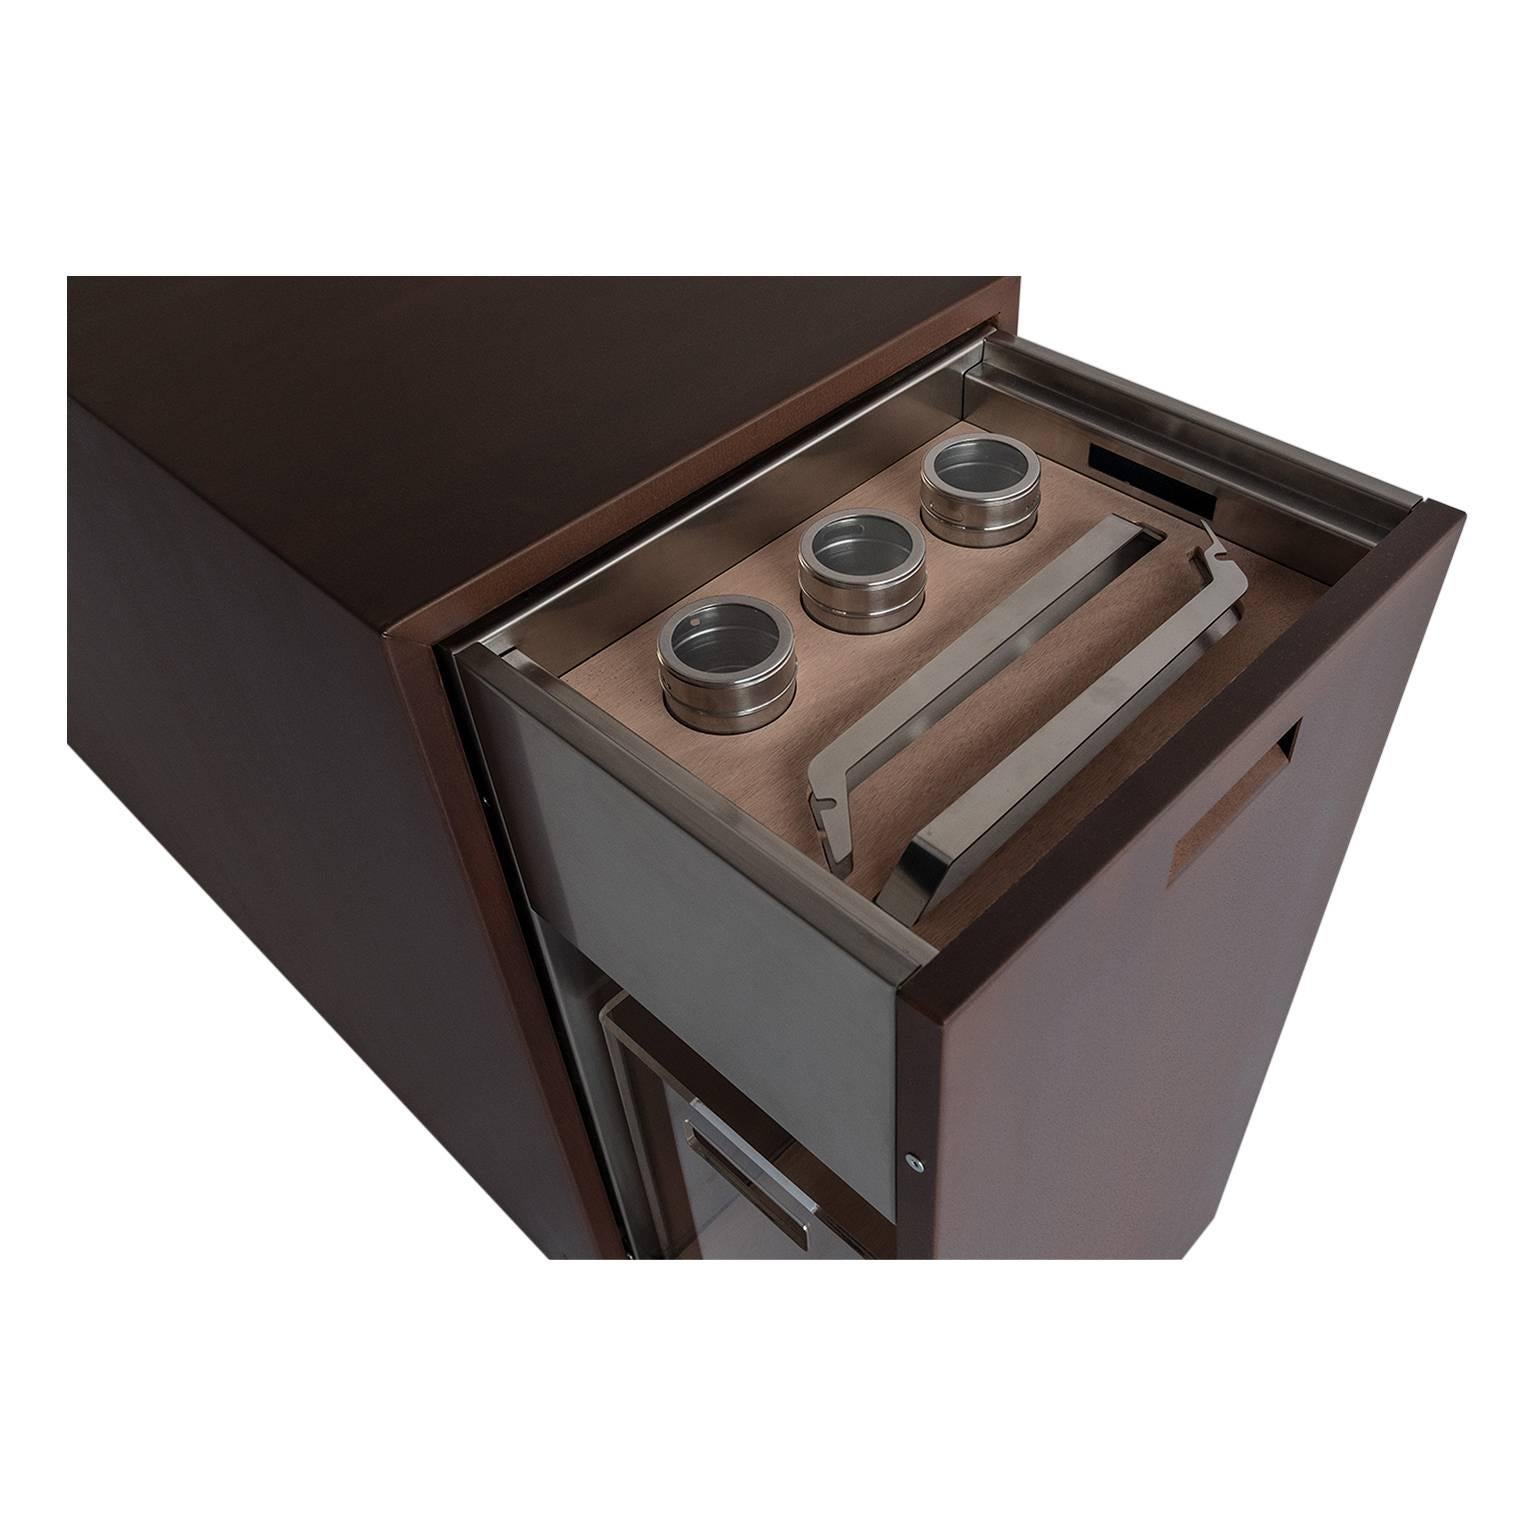 Italian Elegant Corten Outdoor Charcoal Barbecue with Shelves and Cupboards, Snail For Sale